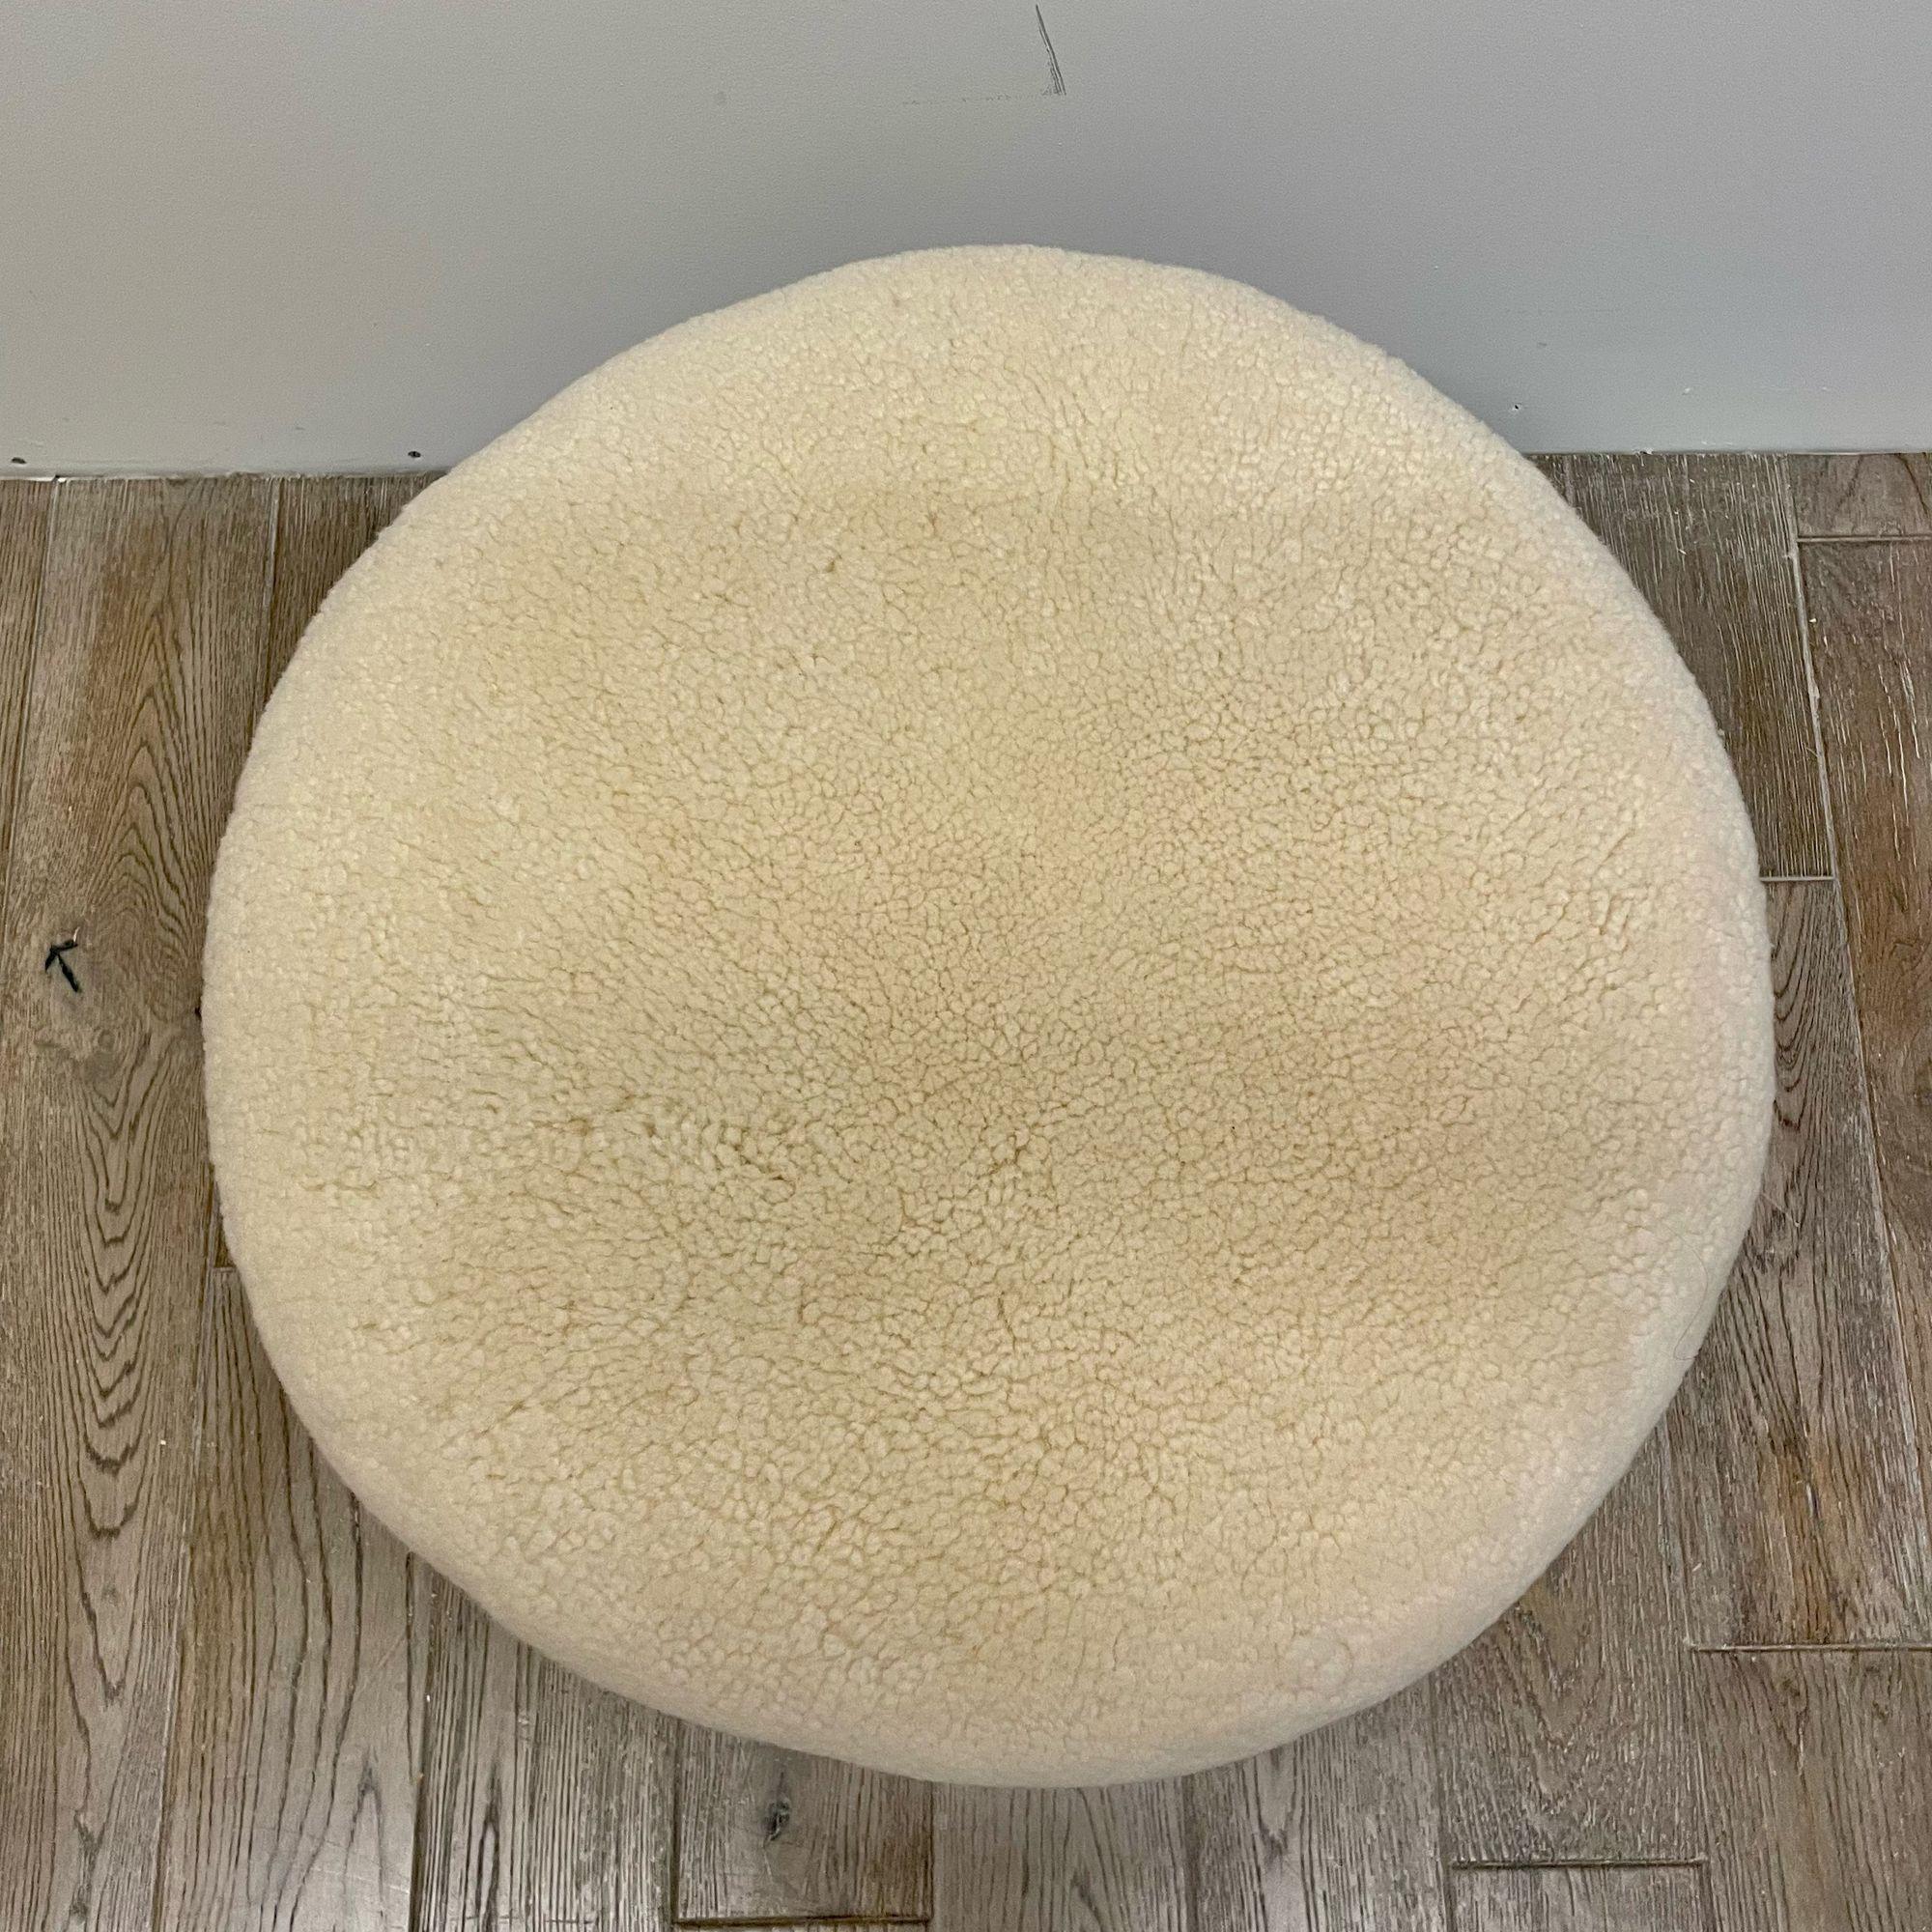 Contemporary Swedish Modern Style Sheepskin Footstool / Ottoman, Beige In Good Condition For Sale In Stamford, CT